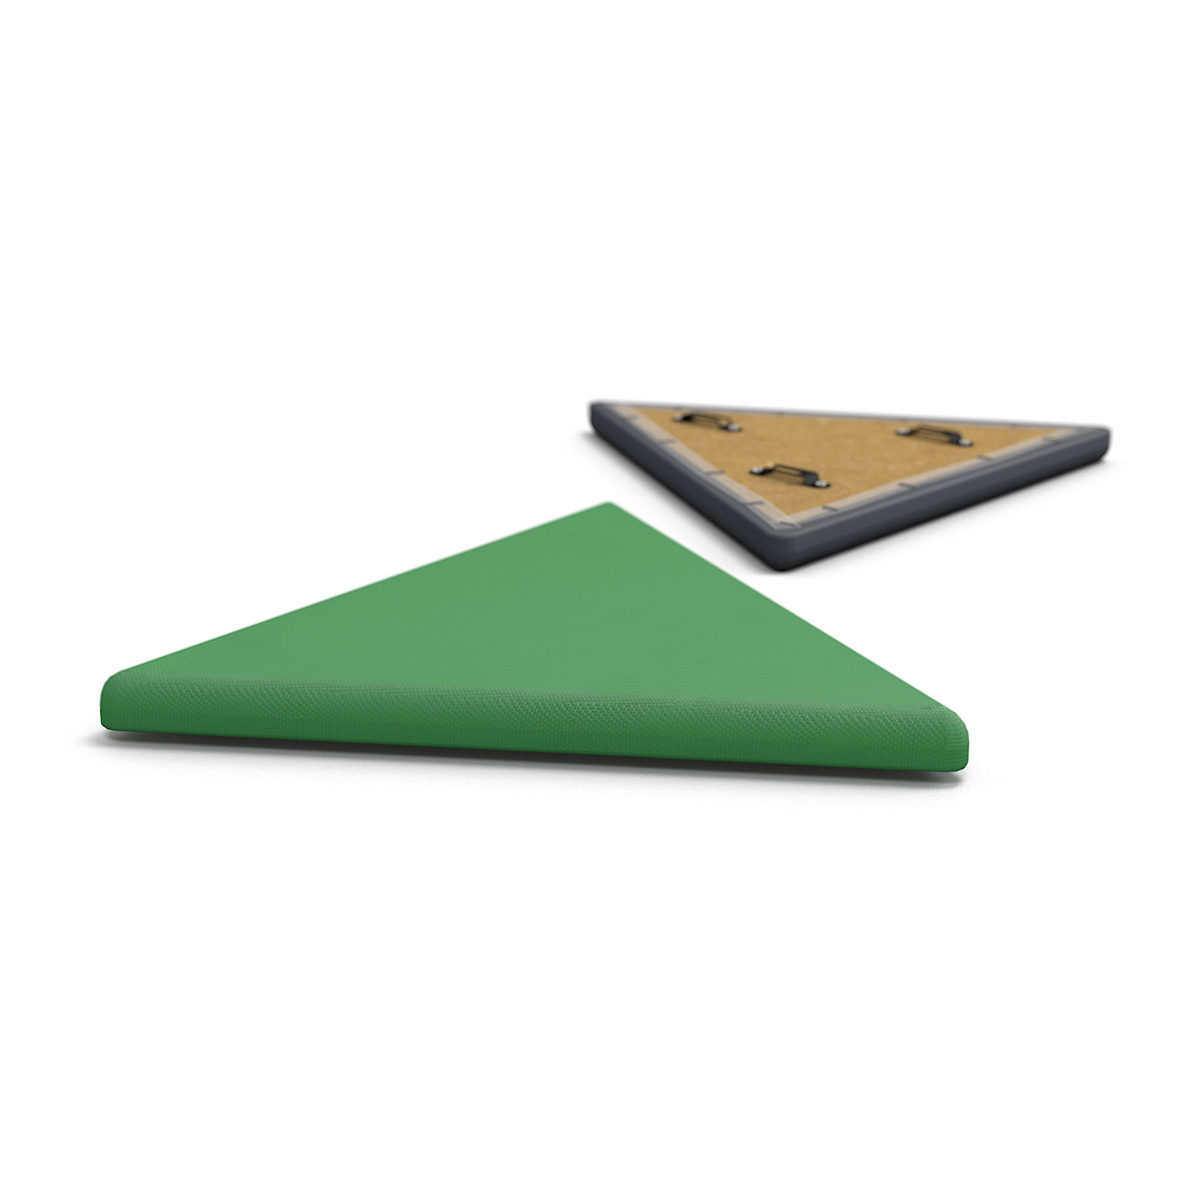 Triangular Acoustic Wall Panels Reduces Noise & Distractions in Offices